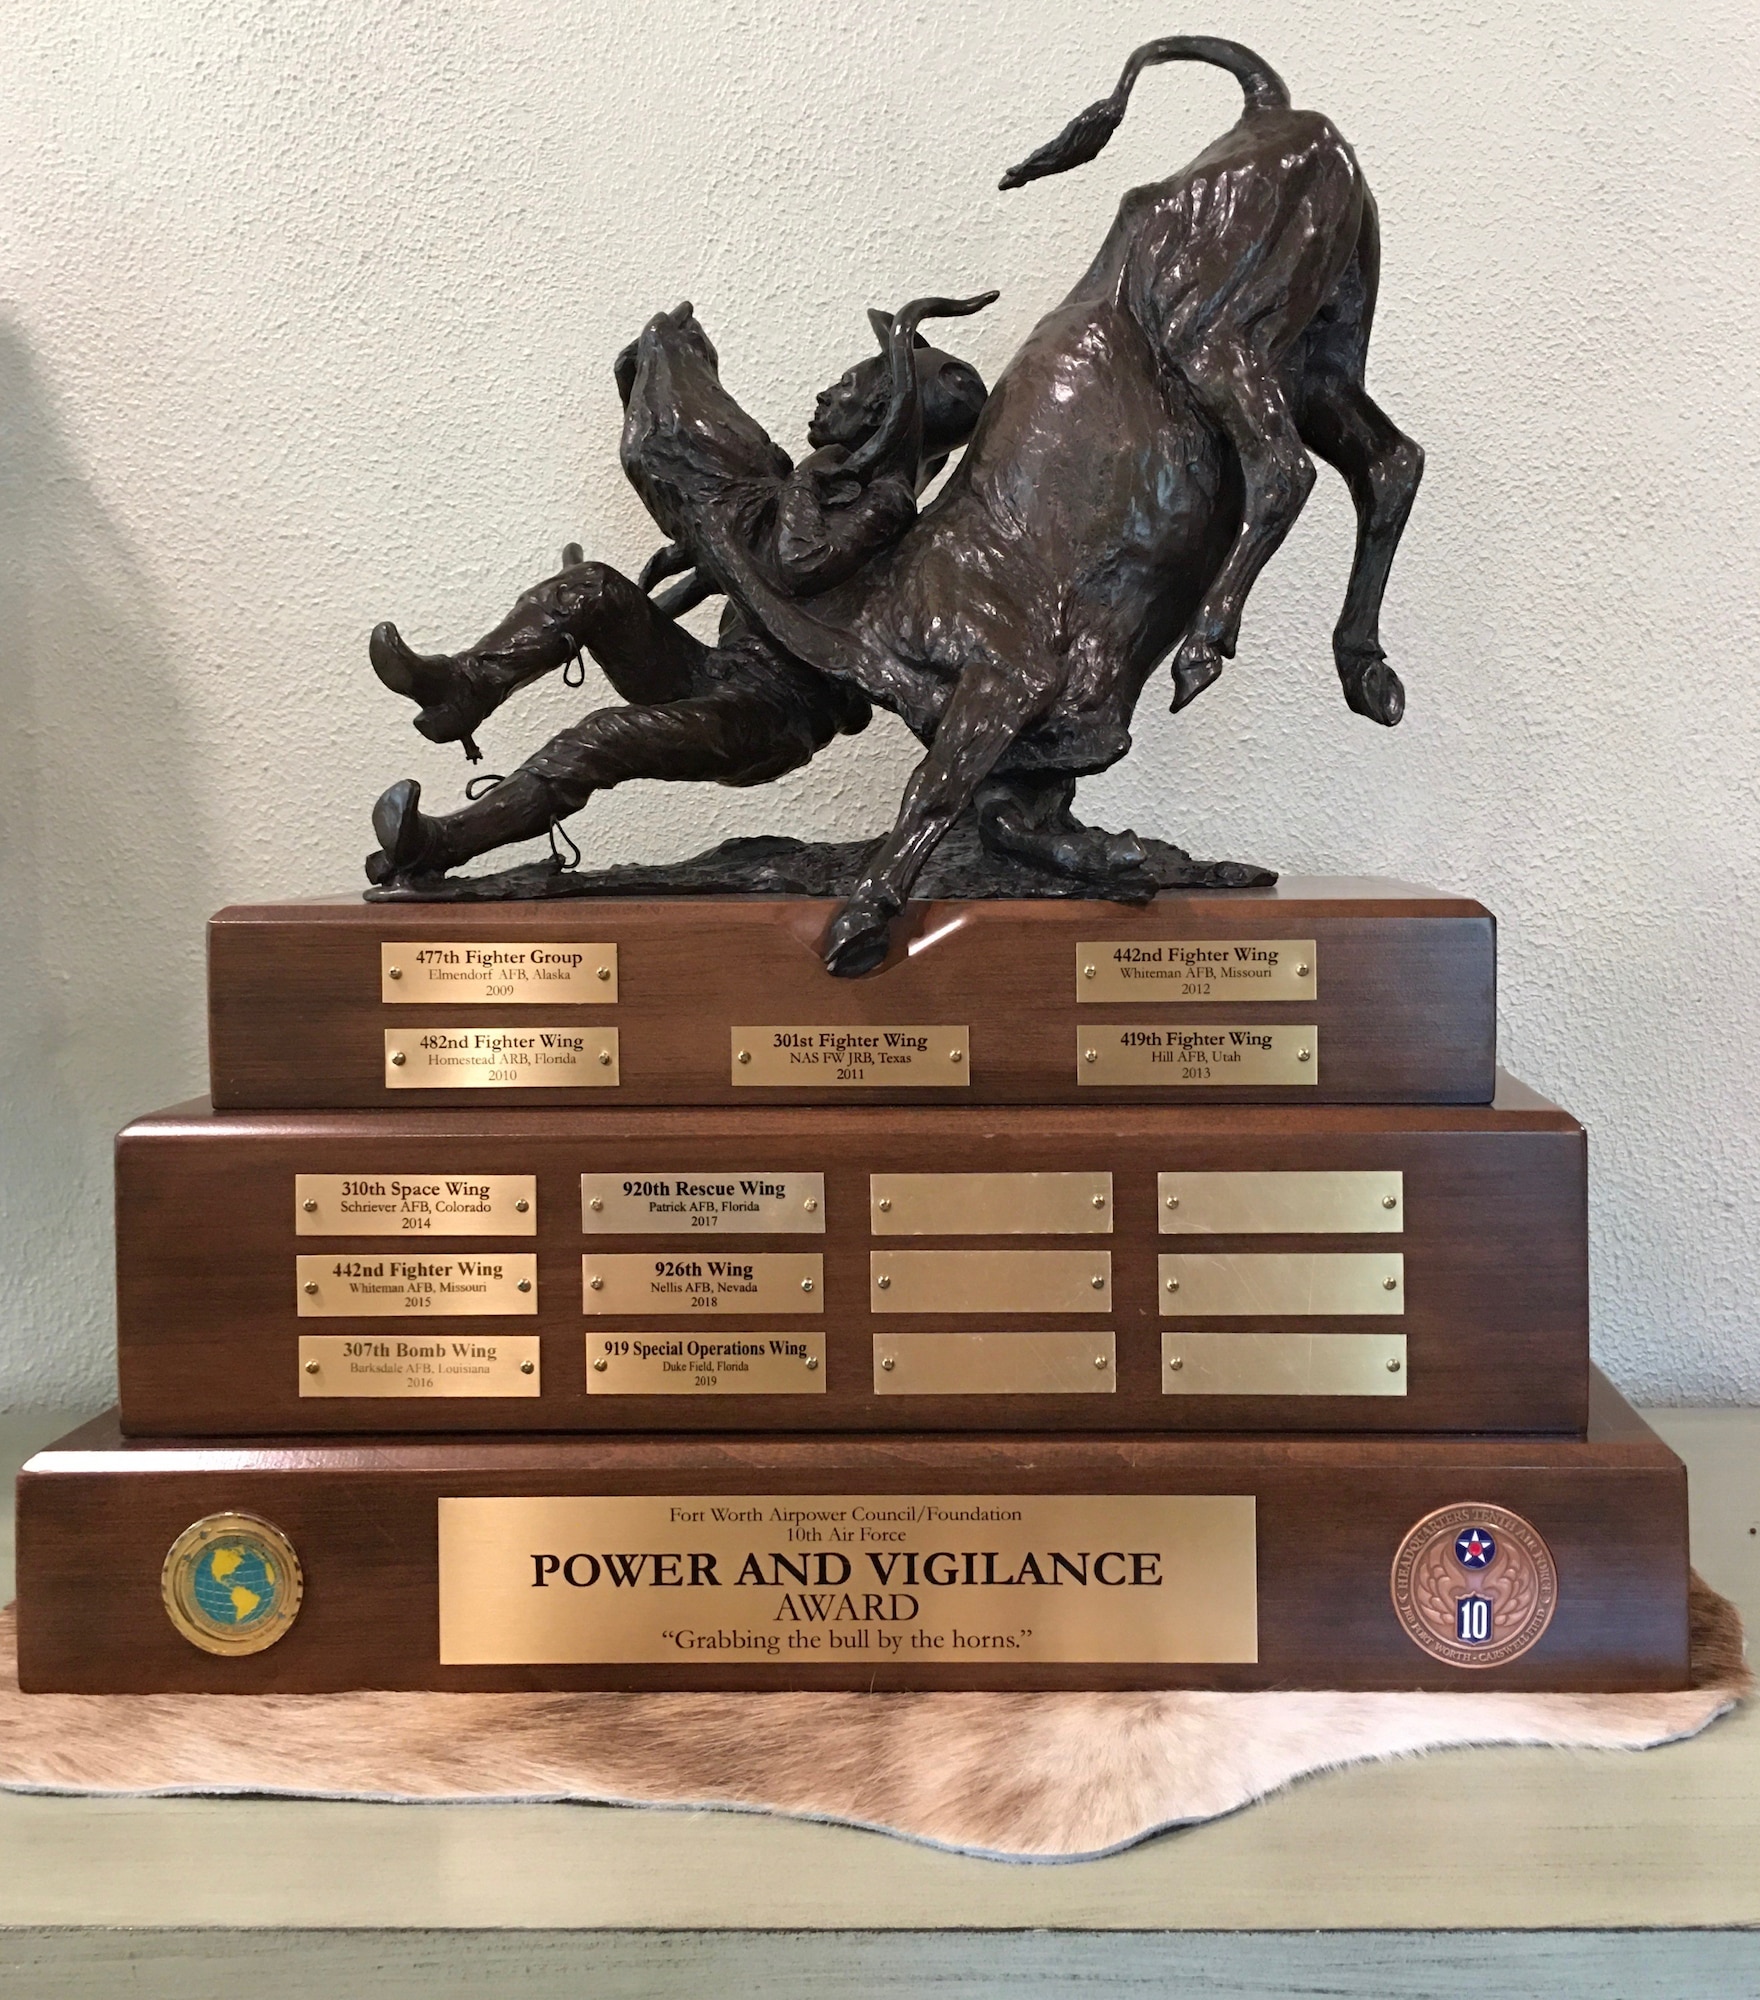 Power and Vigilance trophy sitting on a flat surface